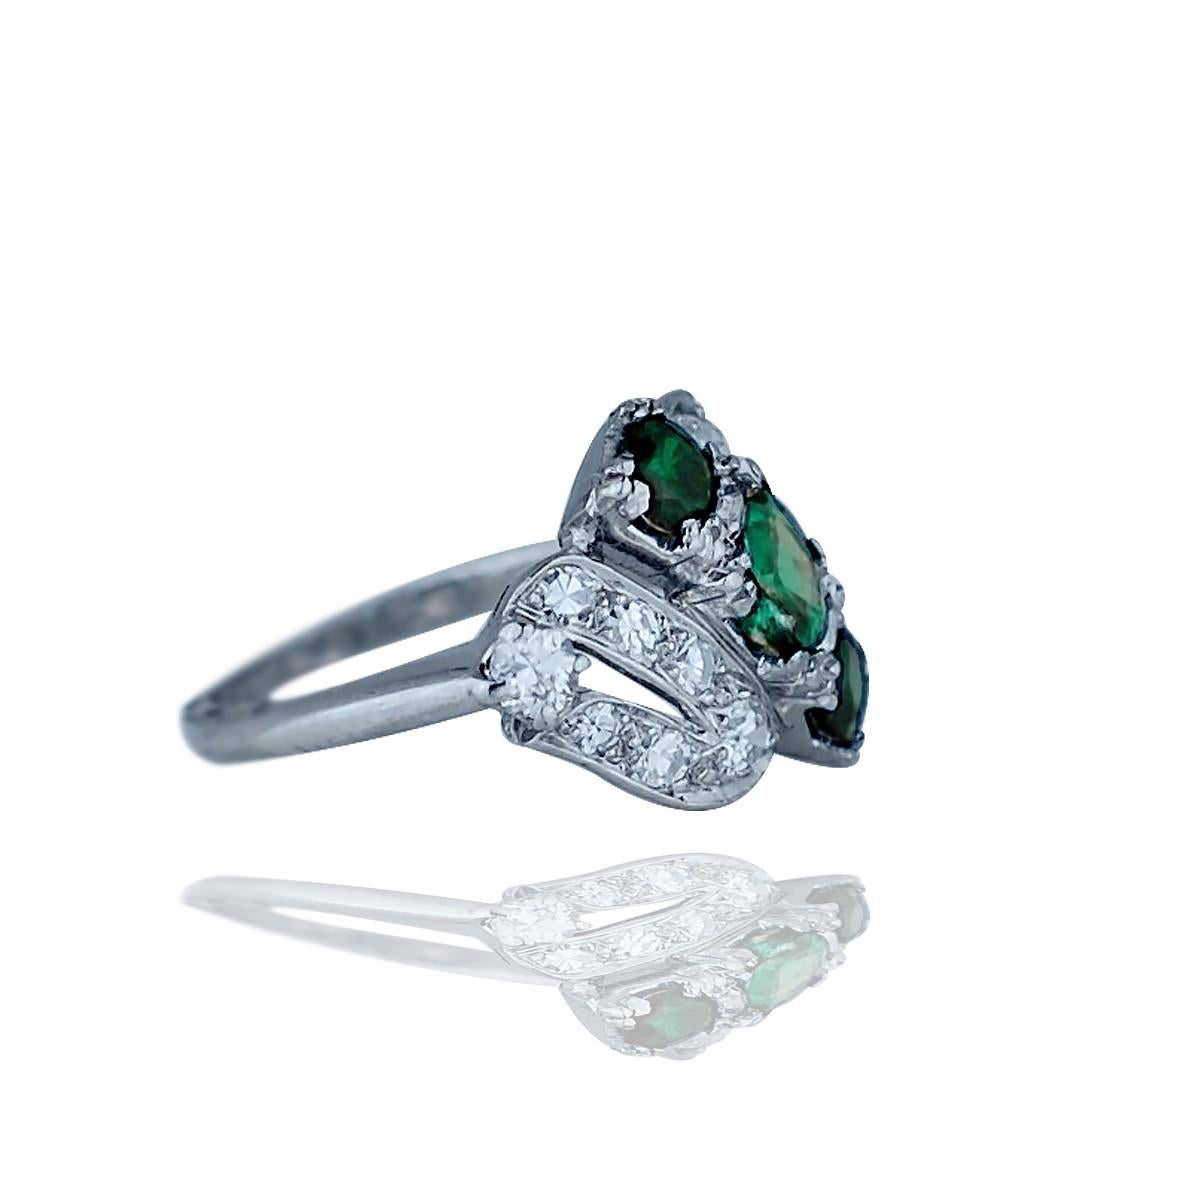 Retro Platinum .50 Ct. Diamond, 3 Green Stone 
The setting is set with (16) round single cut diamonds graduating from 2.0-3.2 mm in diameter. The total weight of diamonds is estimated .50 carat. 
Quality is SI1 clarity and G color, Size 6 and weight